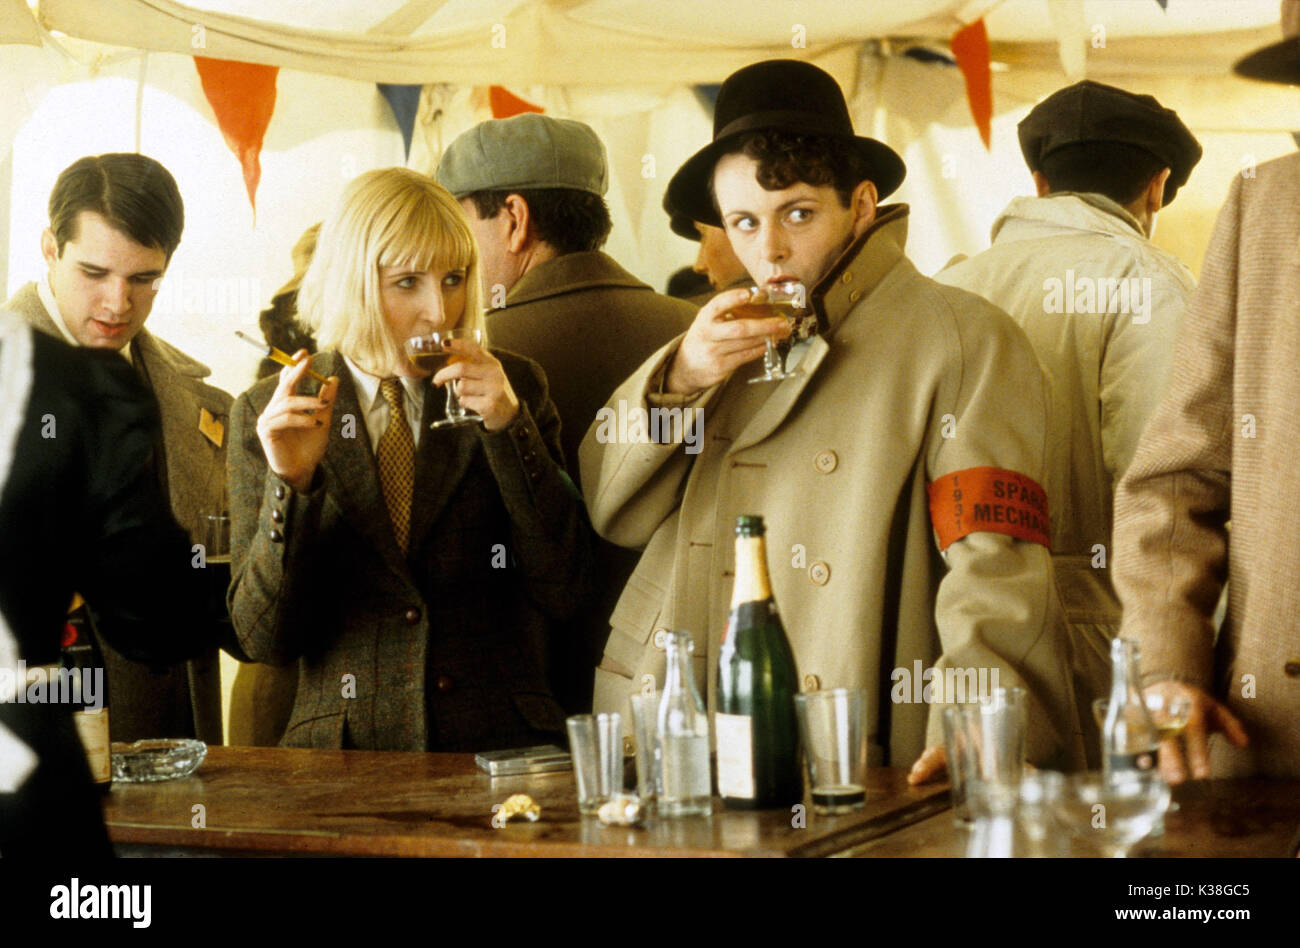 FENELLA WOOLGAR BRIGHT YOUNG THINGS , MICHAEL SHEEN (miles) Date : 2003 Banque D'Images